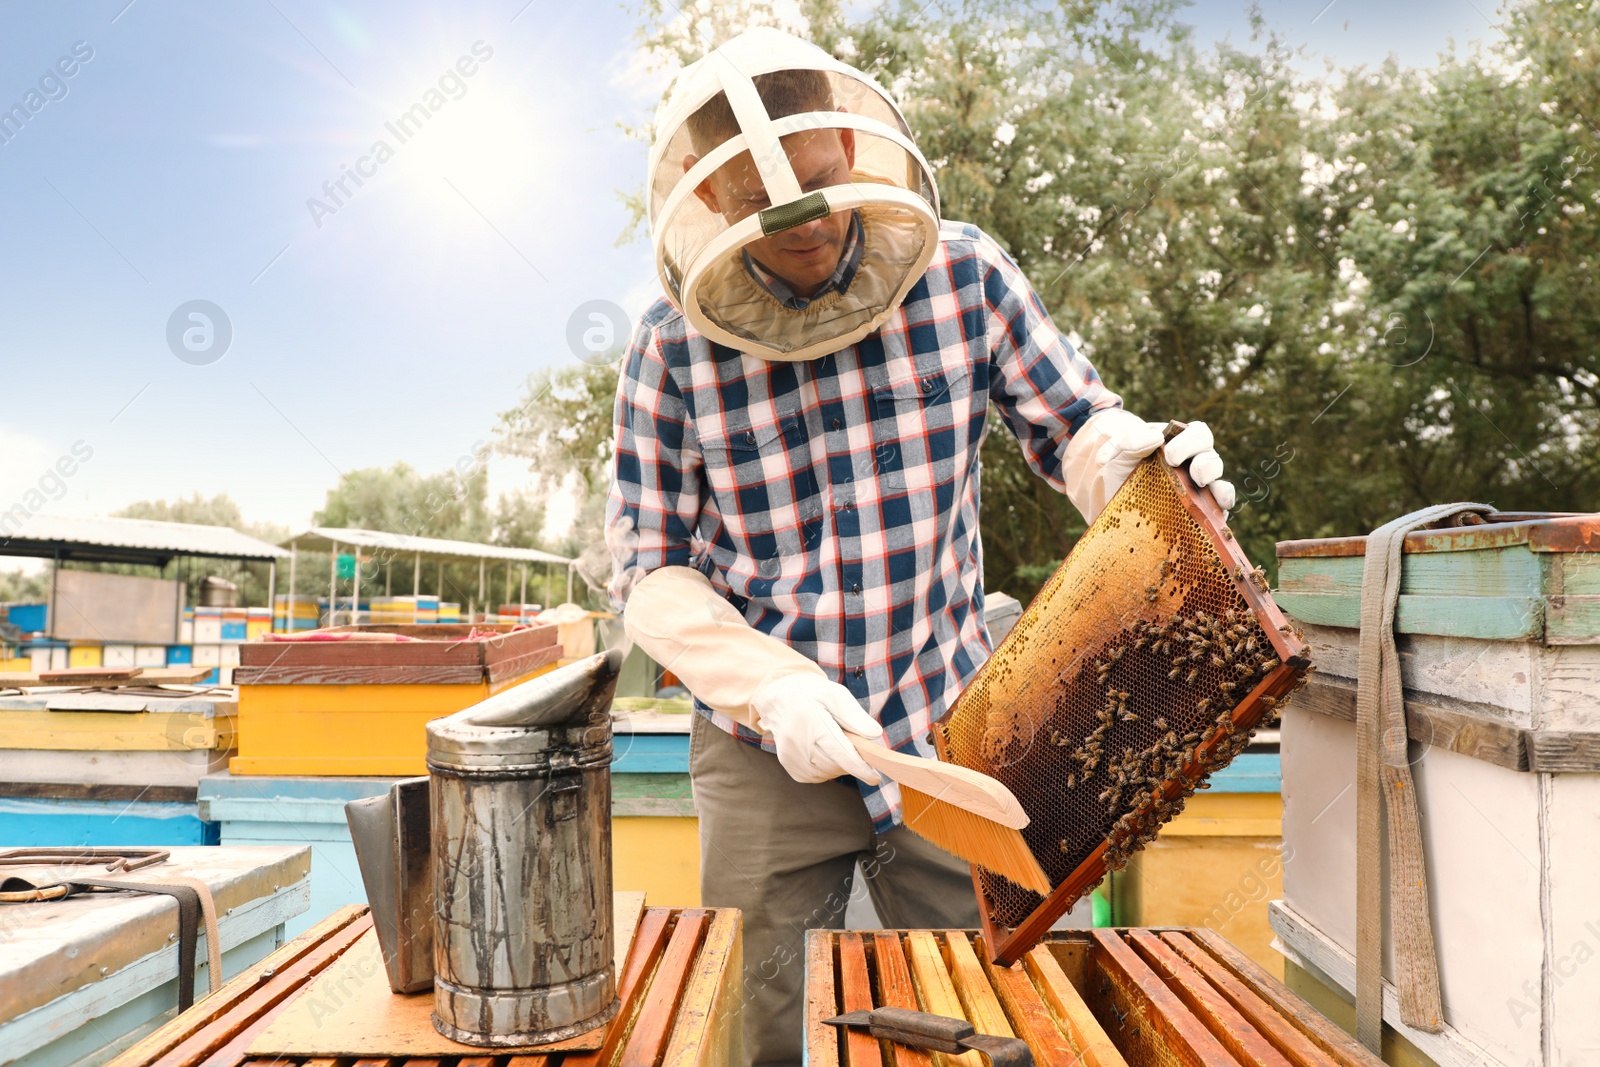 Photo of Beekeeper brushing bees from hive frame at apiary. Harvesting honey